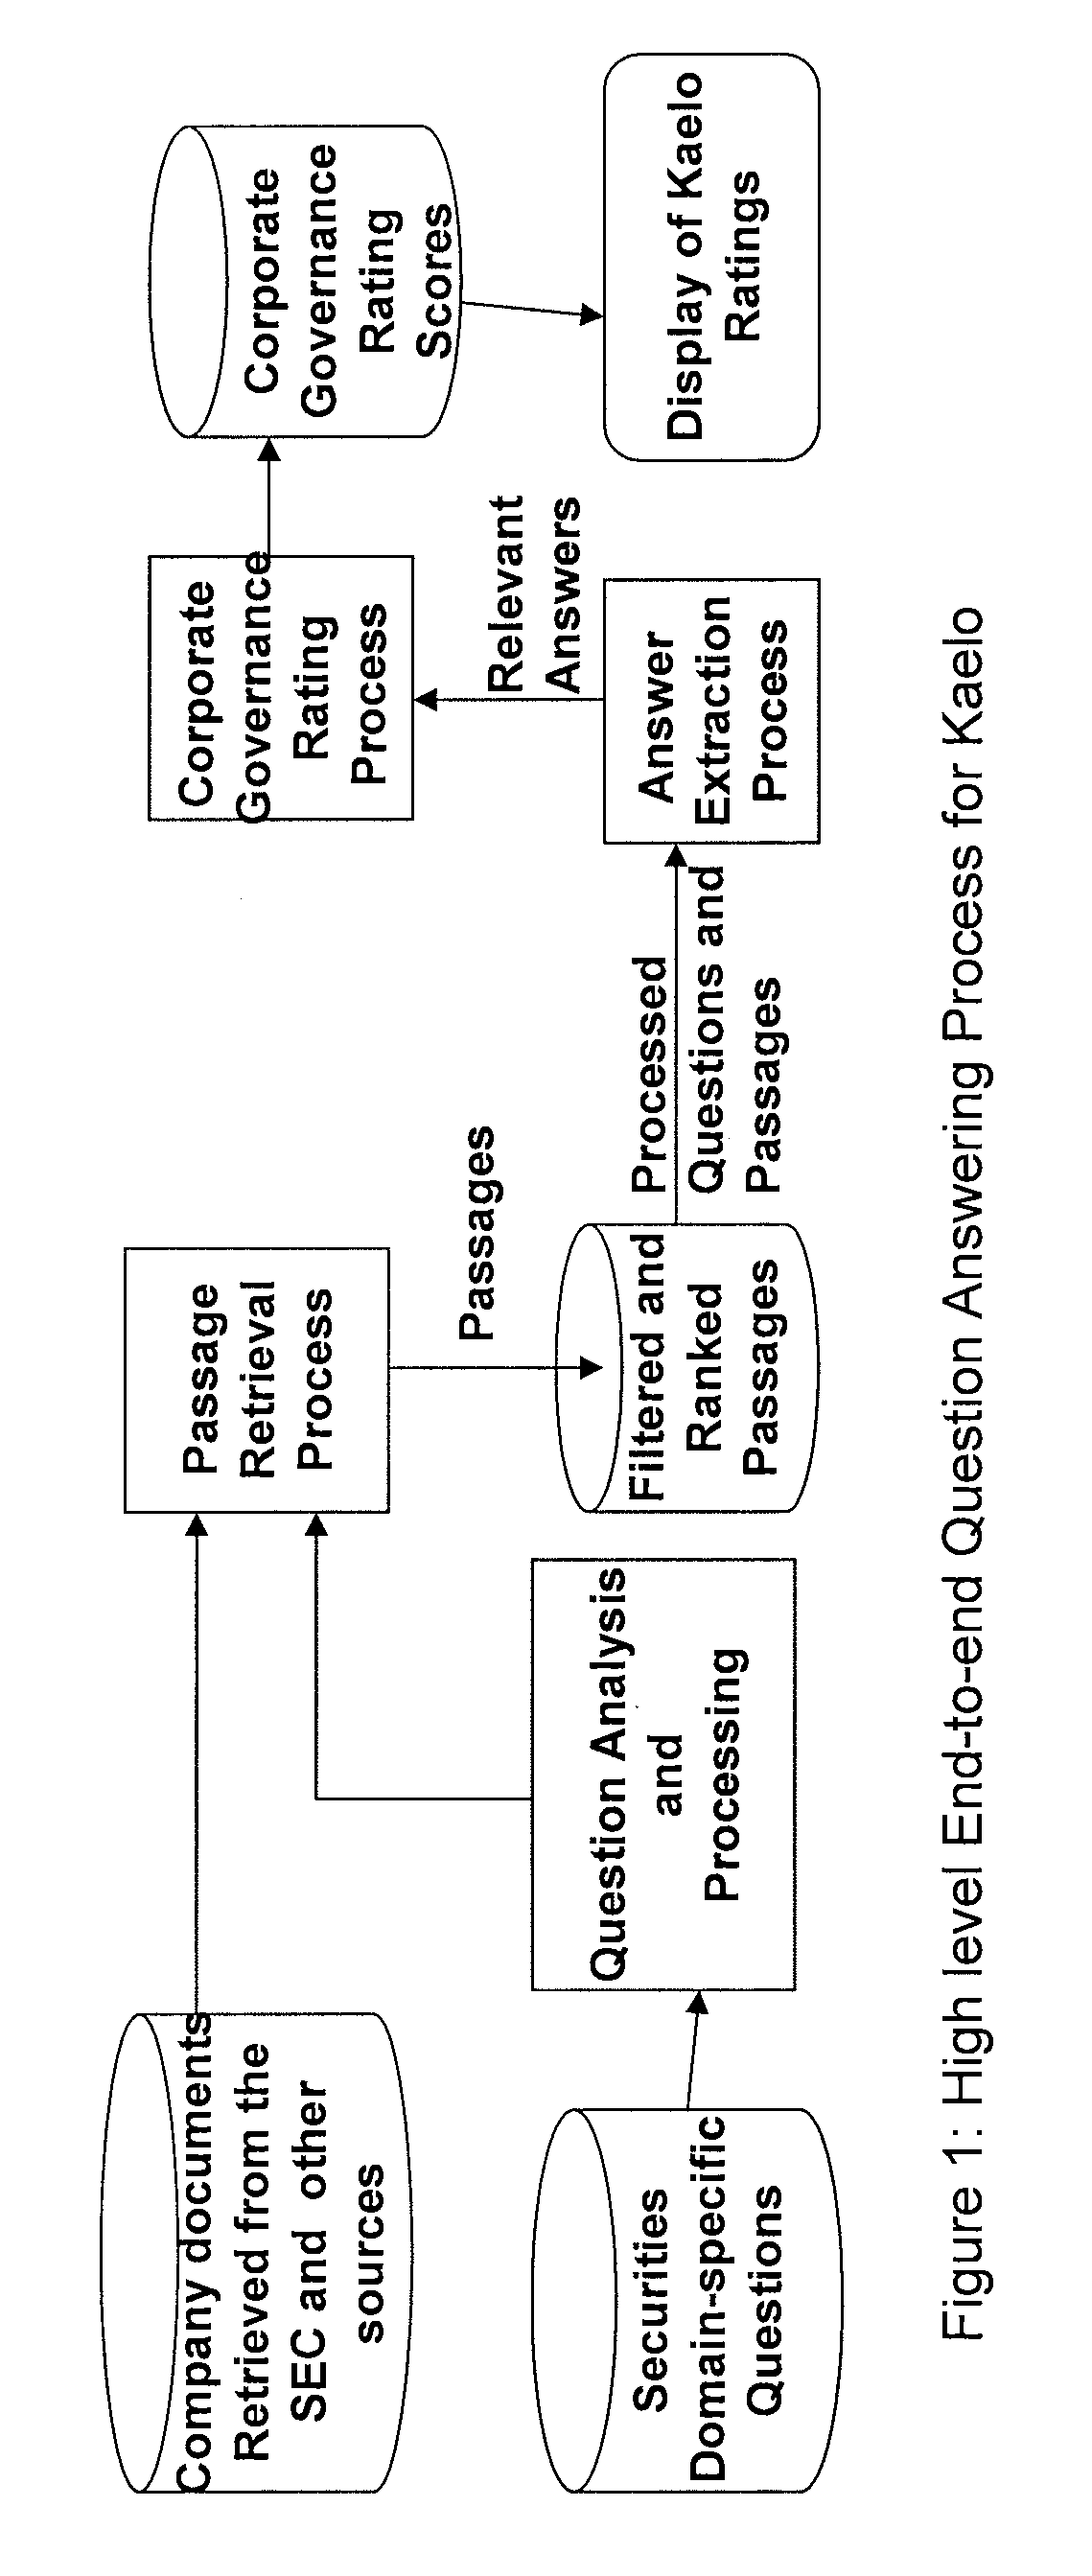 Method and system for an automated corporate governance rating system